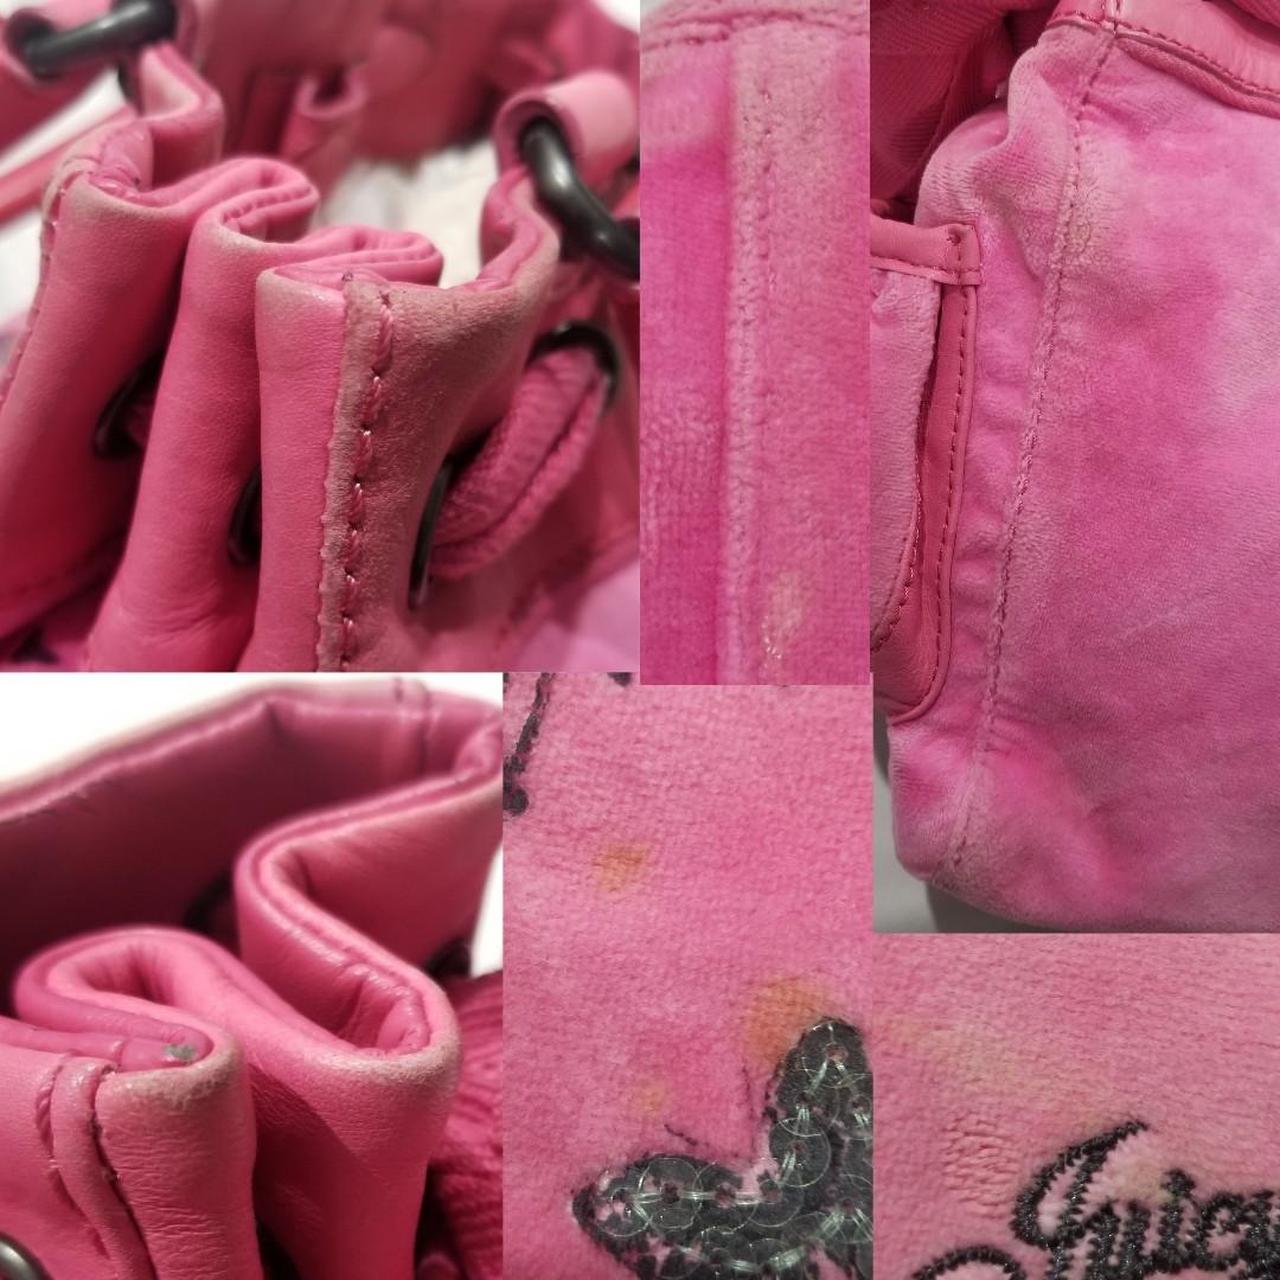 CHANEL Pink Precision Bag Furry pink outside with - Depop